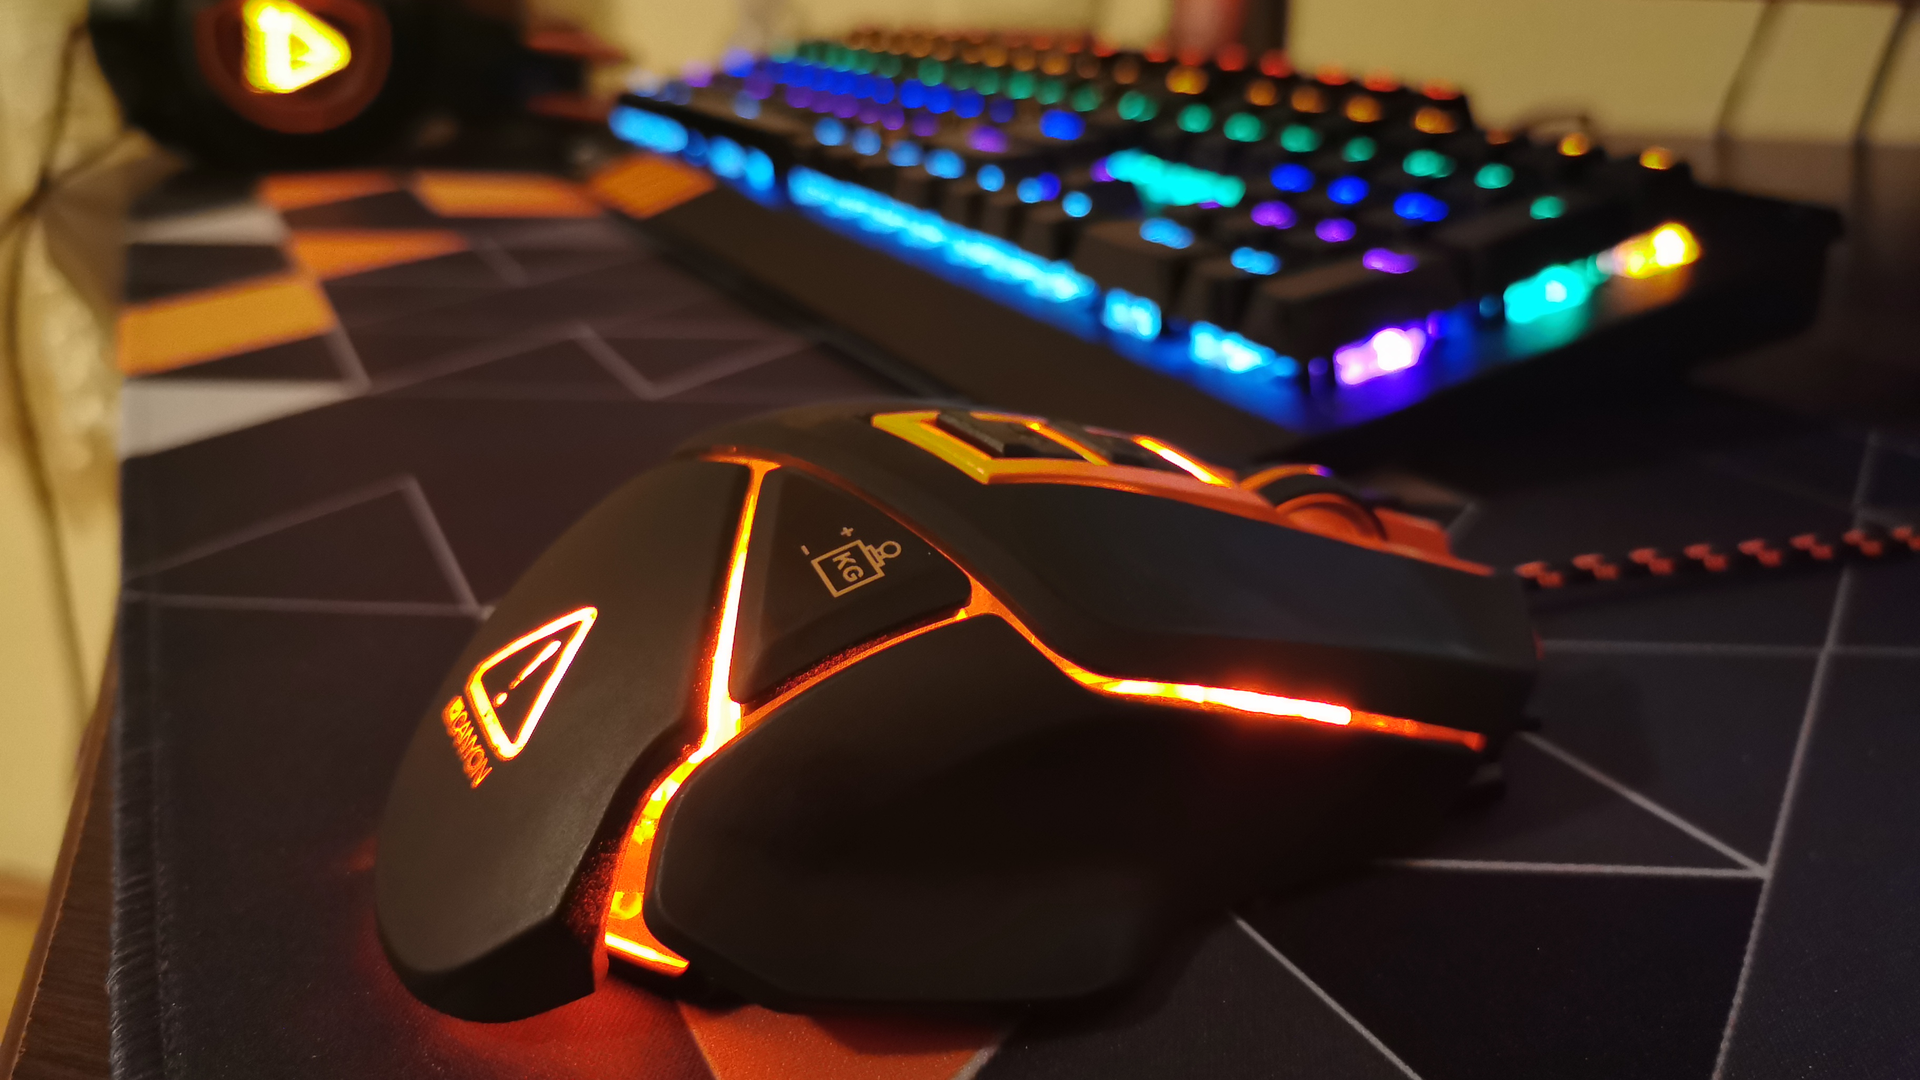 A gaming mouse and keyboard with RGB lighting.